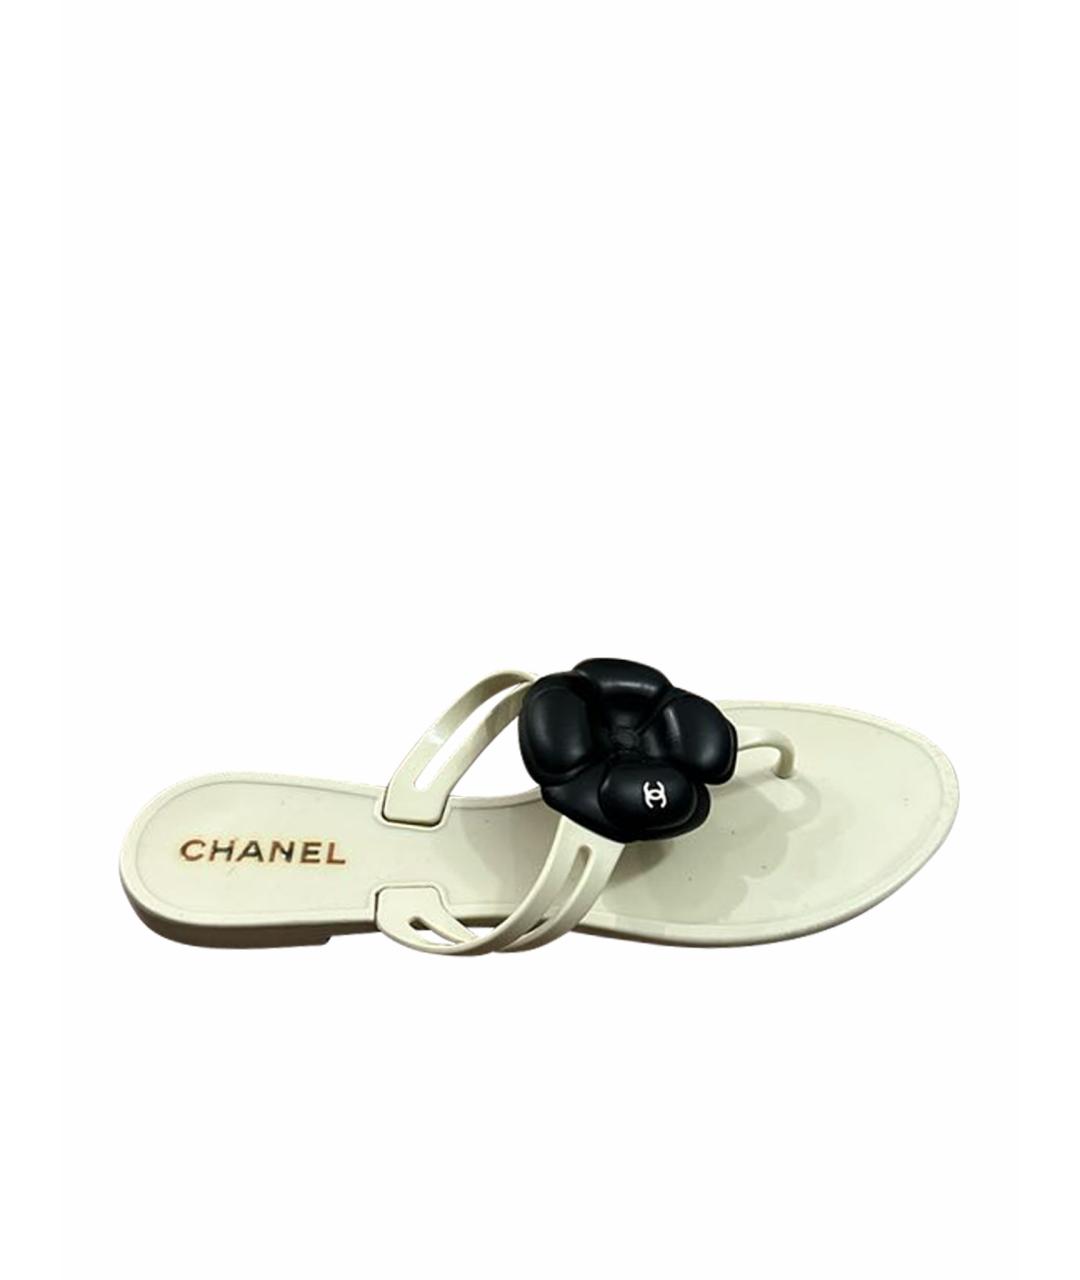 CHANEL PRE-OWNED Белые резиновые шлепанцы, фото 1